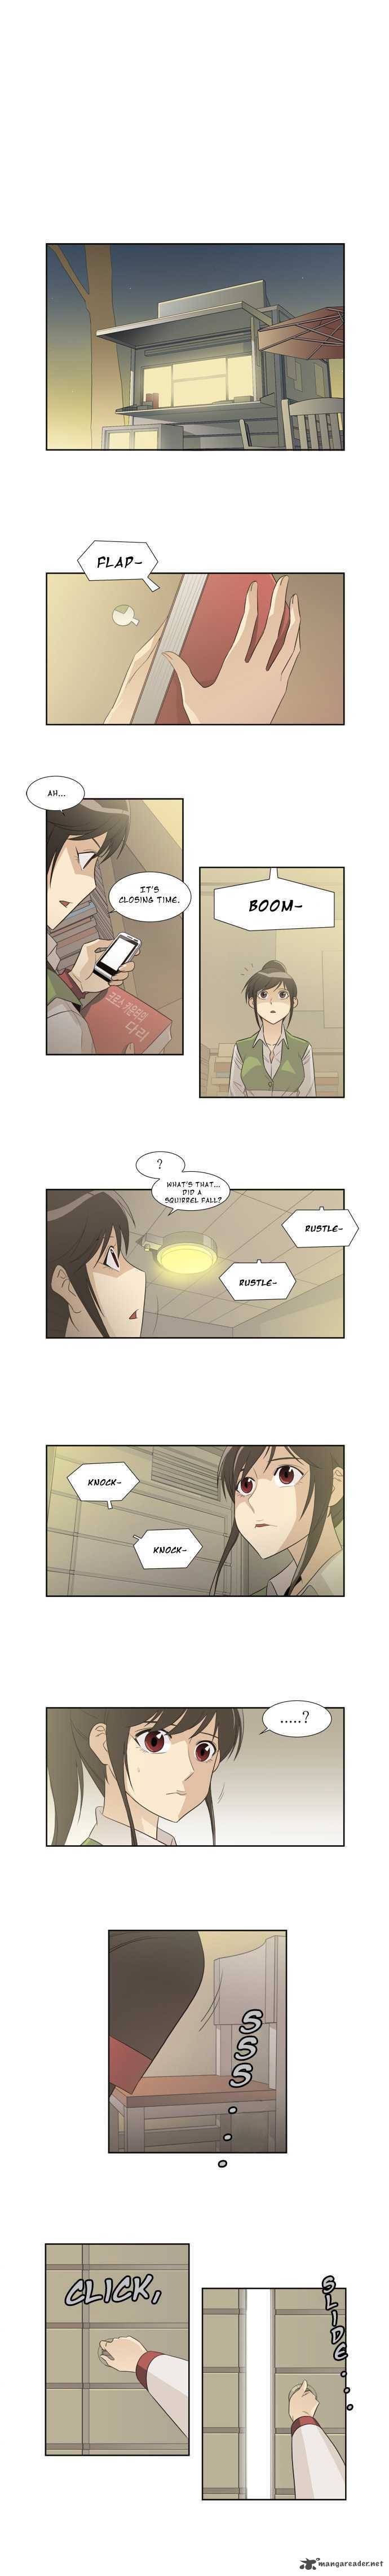 Melo Holic Chapter 9 Page 1